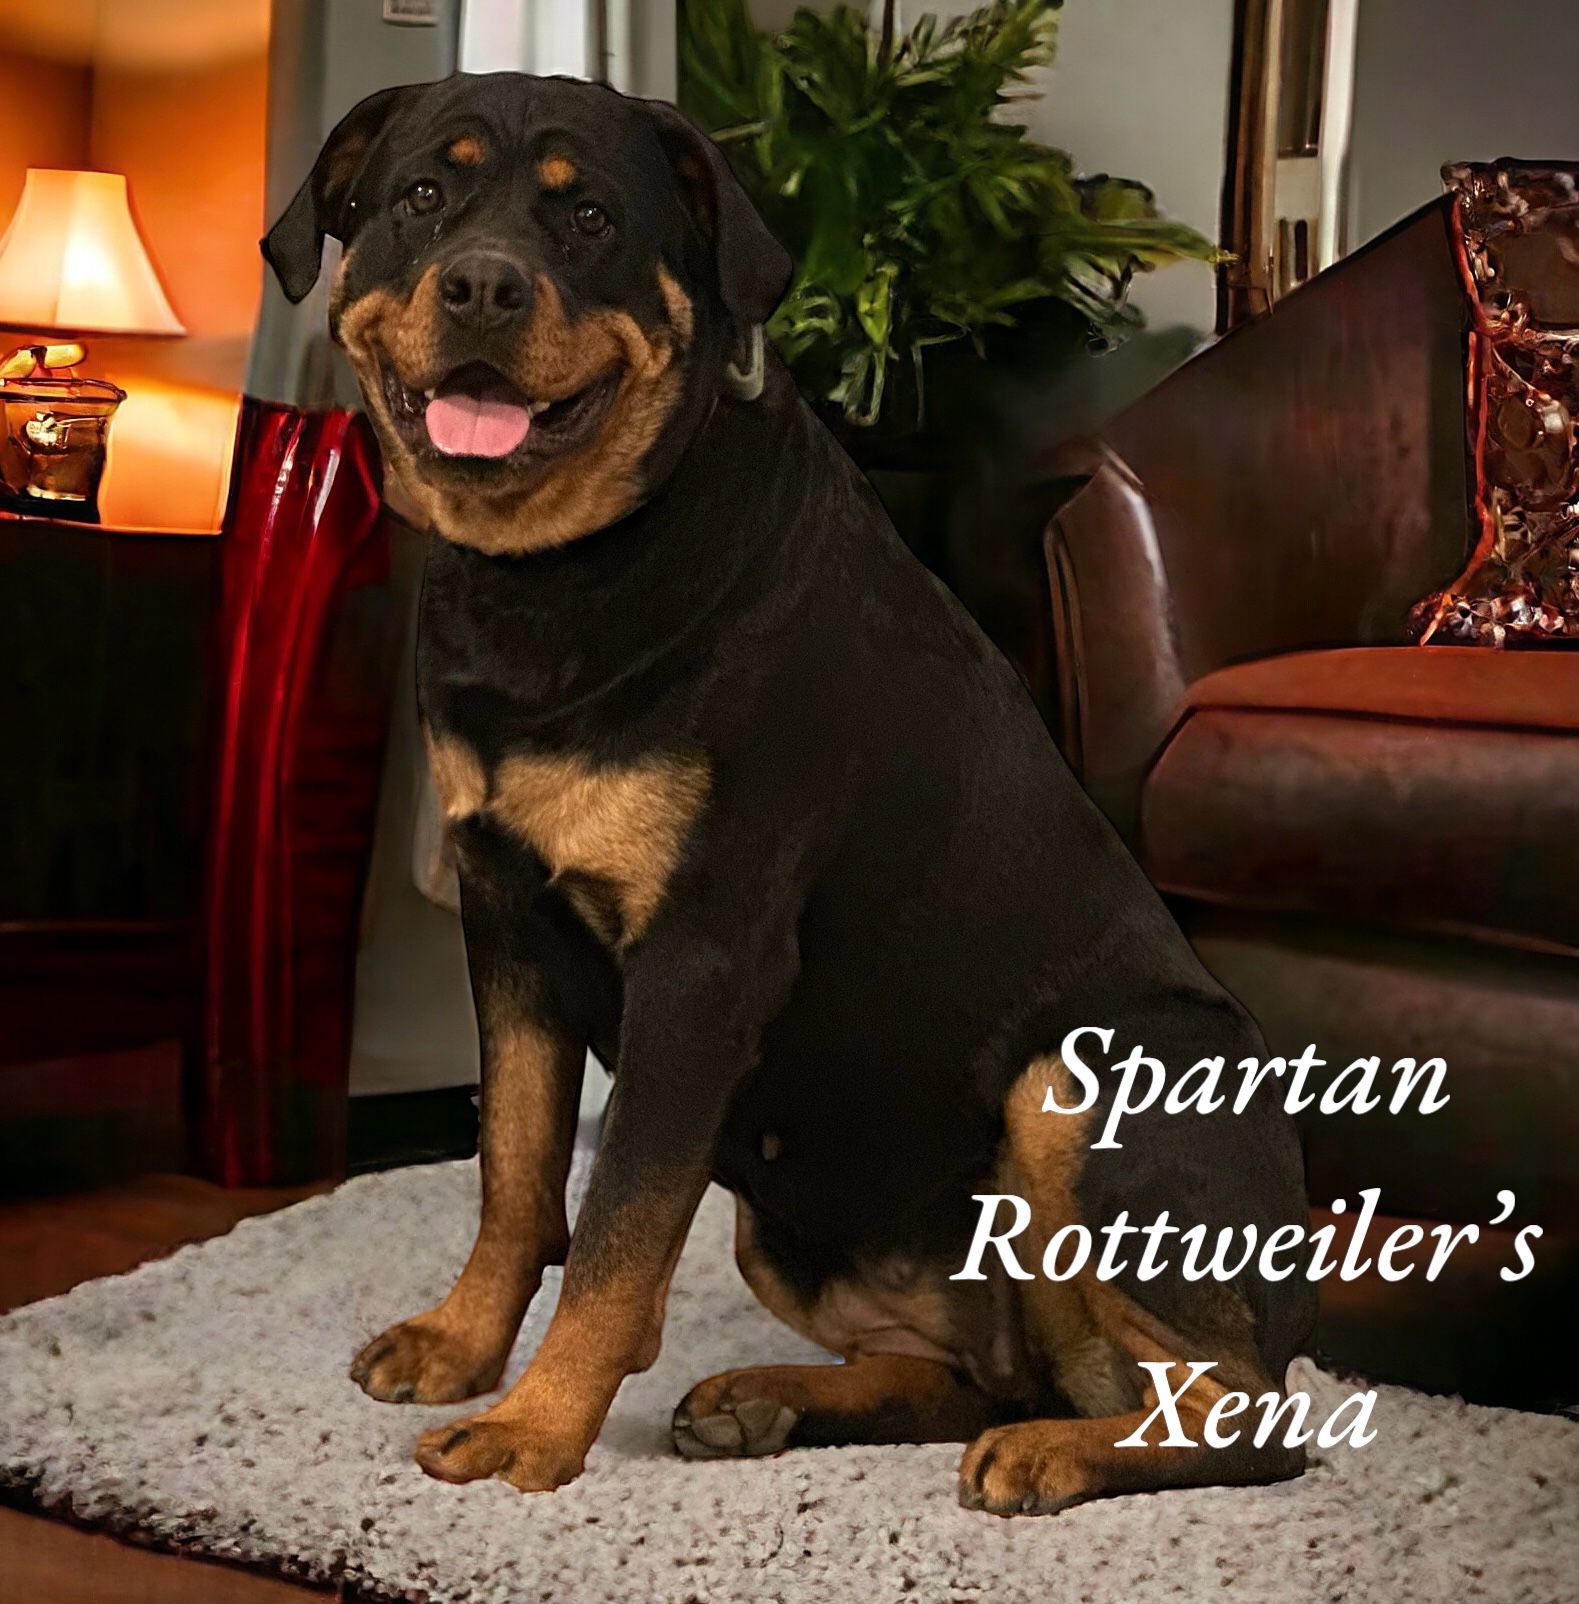 Spartan Rottweilers puppies for sale. Current litters of German Rottweiler puppies and future litters.
